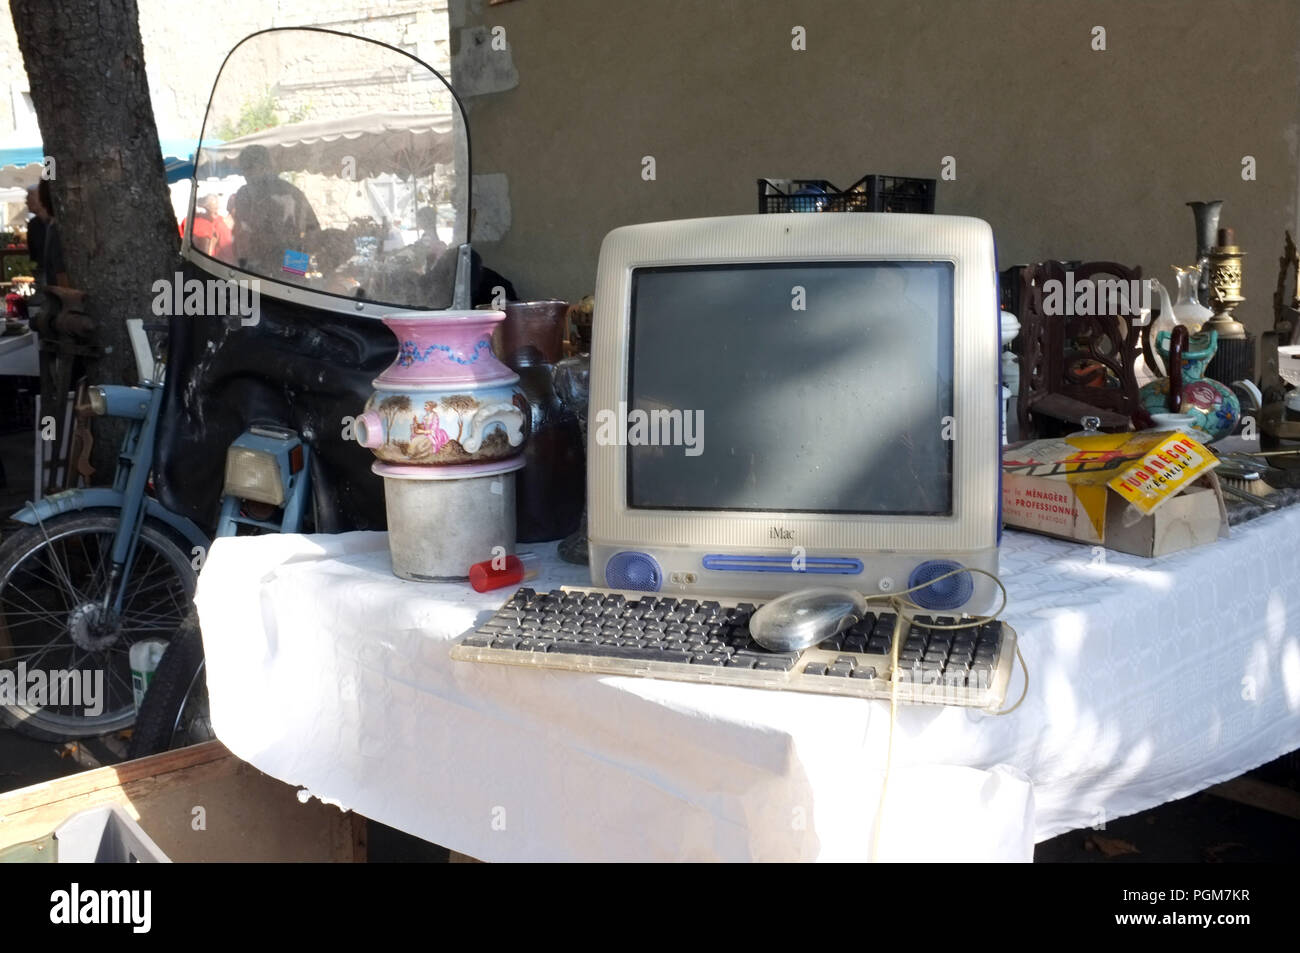 A used early model Apple Mac computer on sale at a French market stall in 2018. Stock Photo